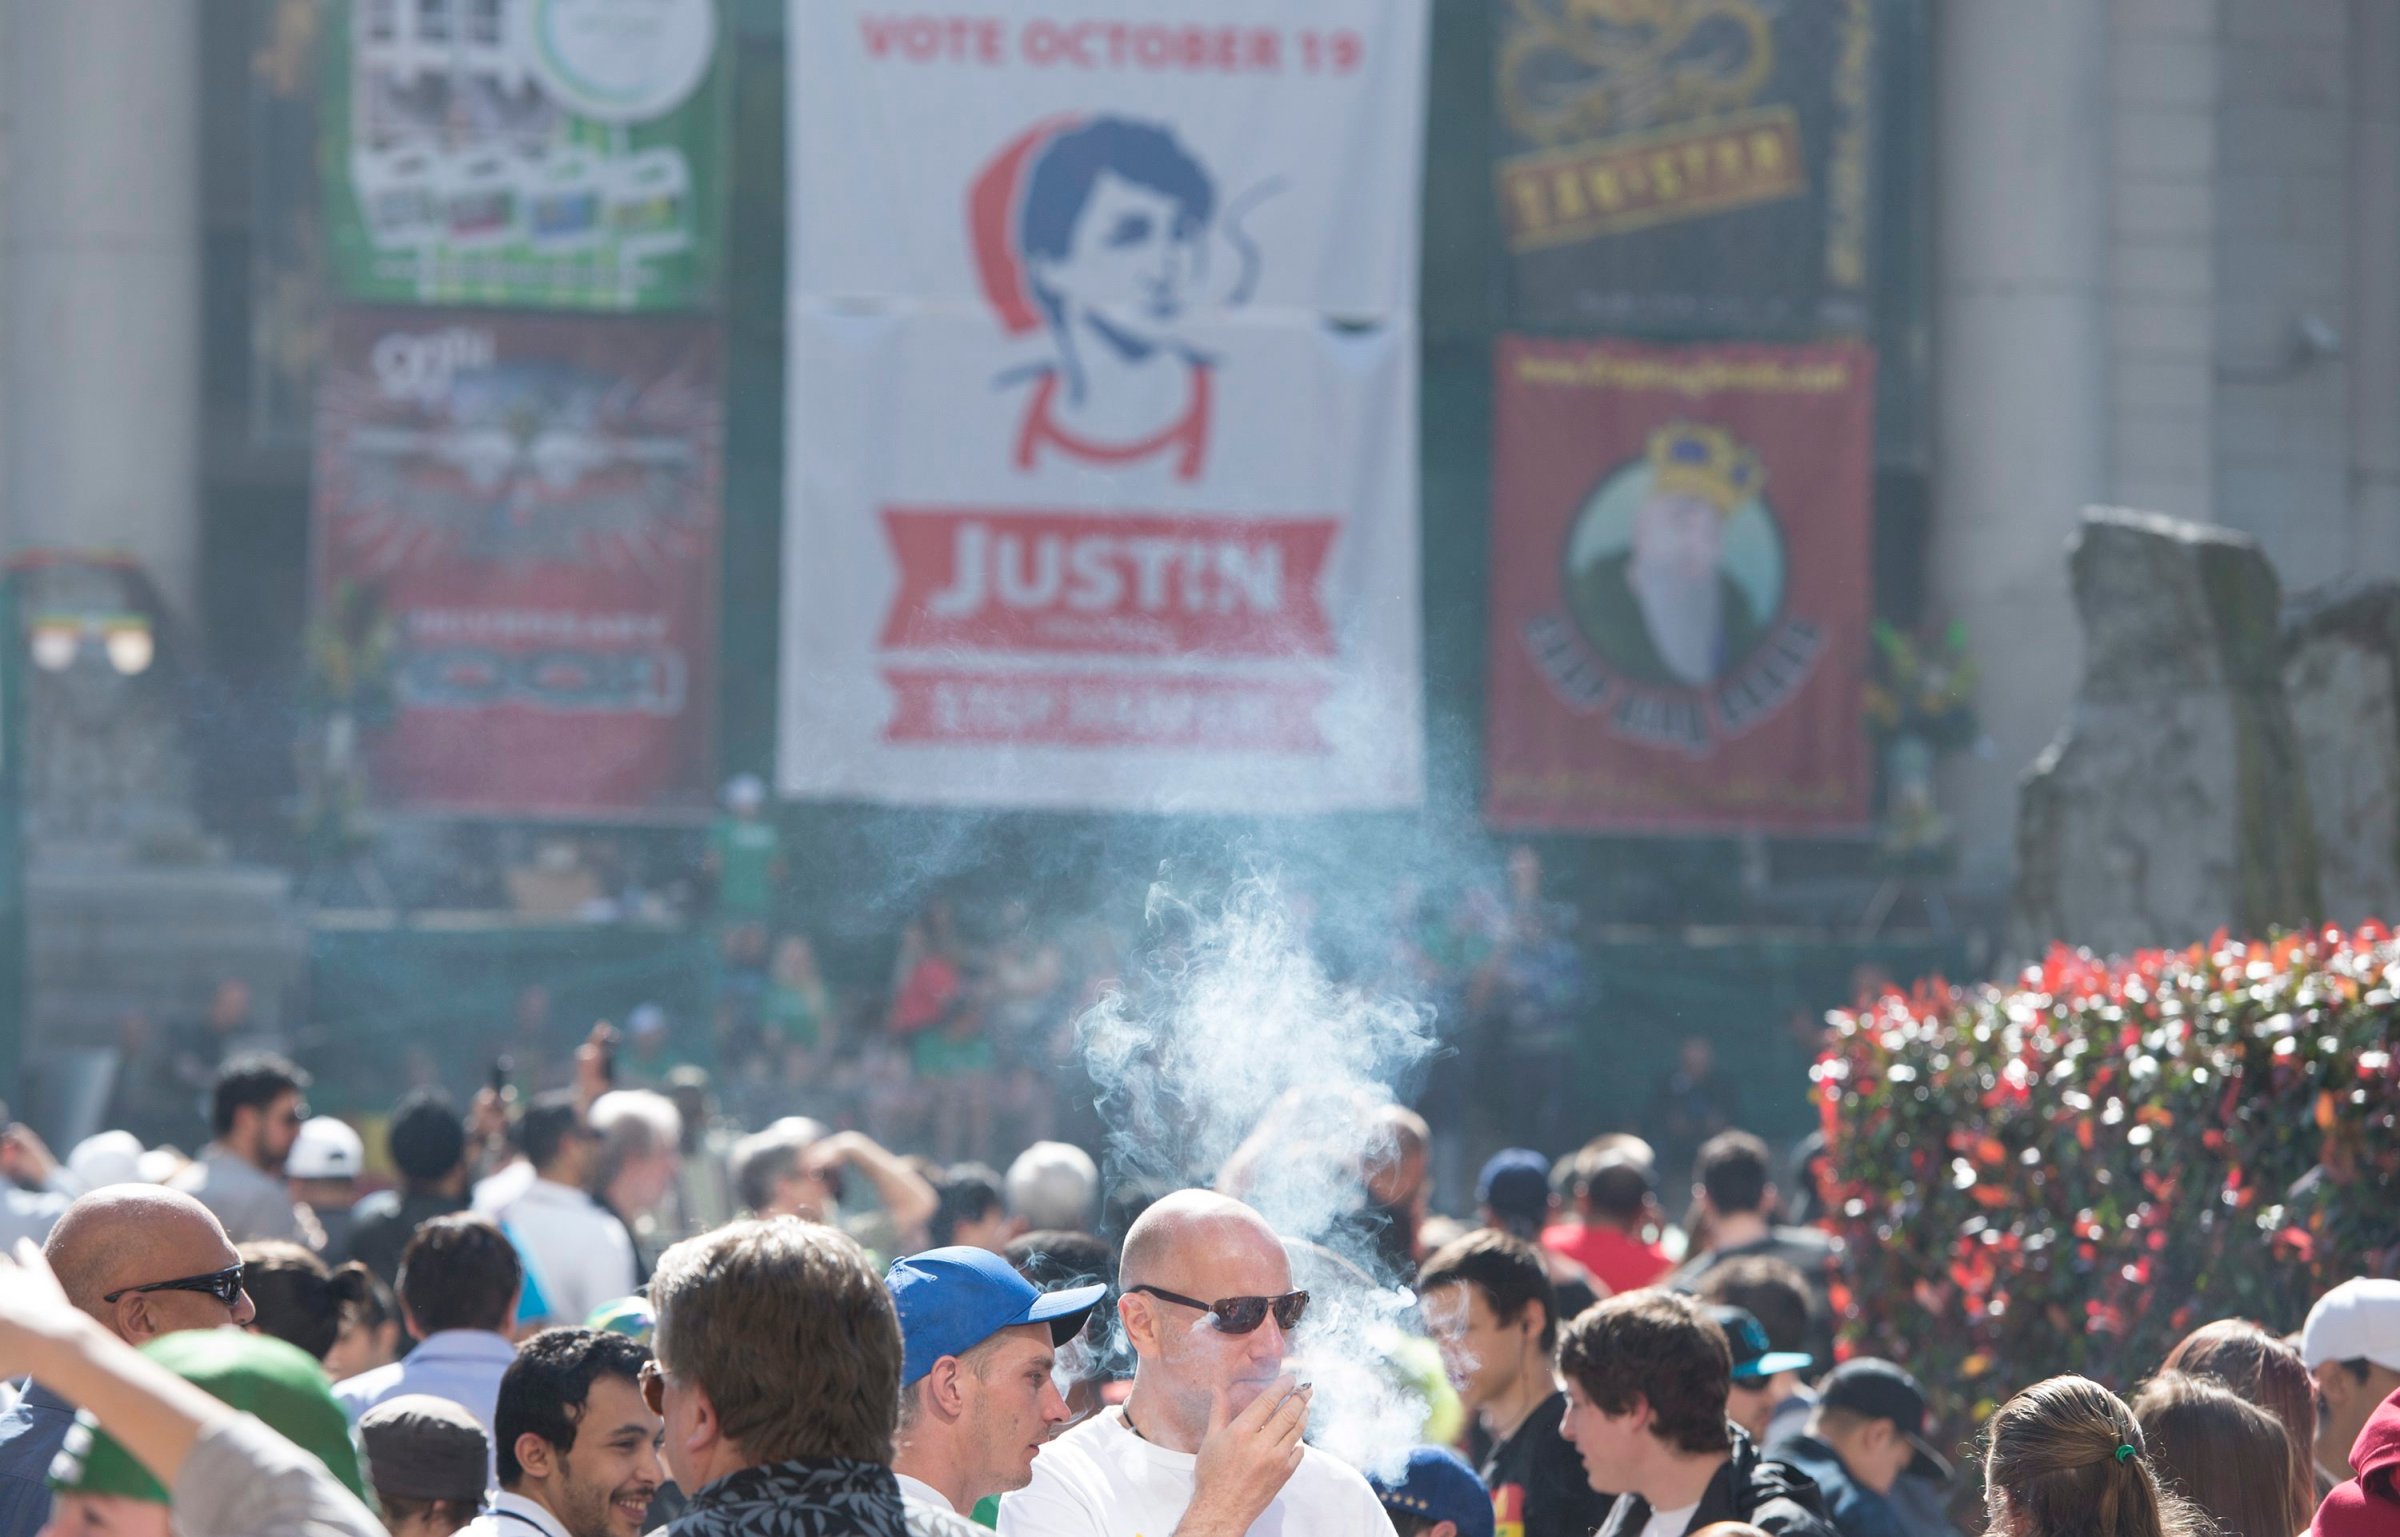 Thousands attend a 4-20 event in downtown Vancouver, B.C., on April 20, 2015